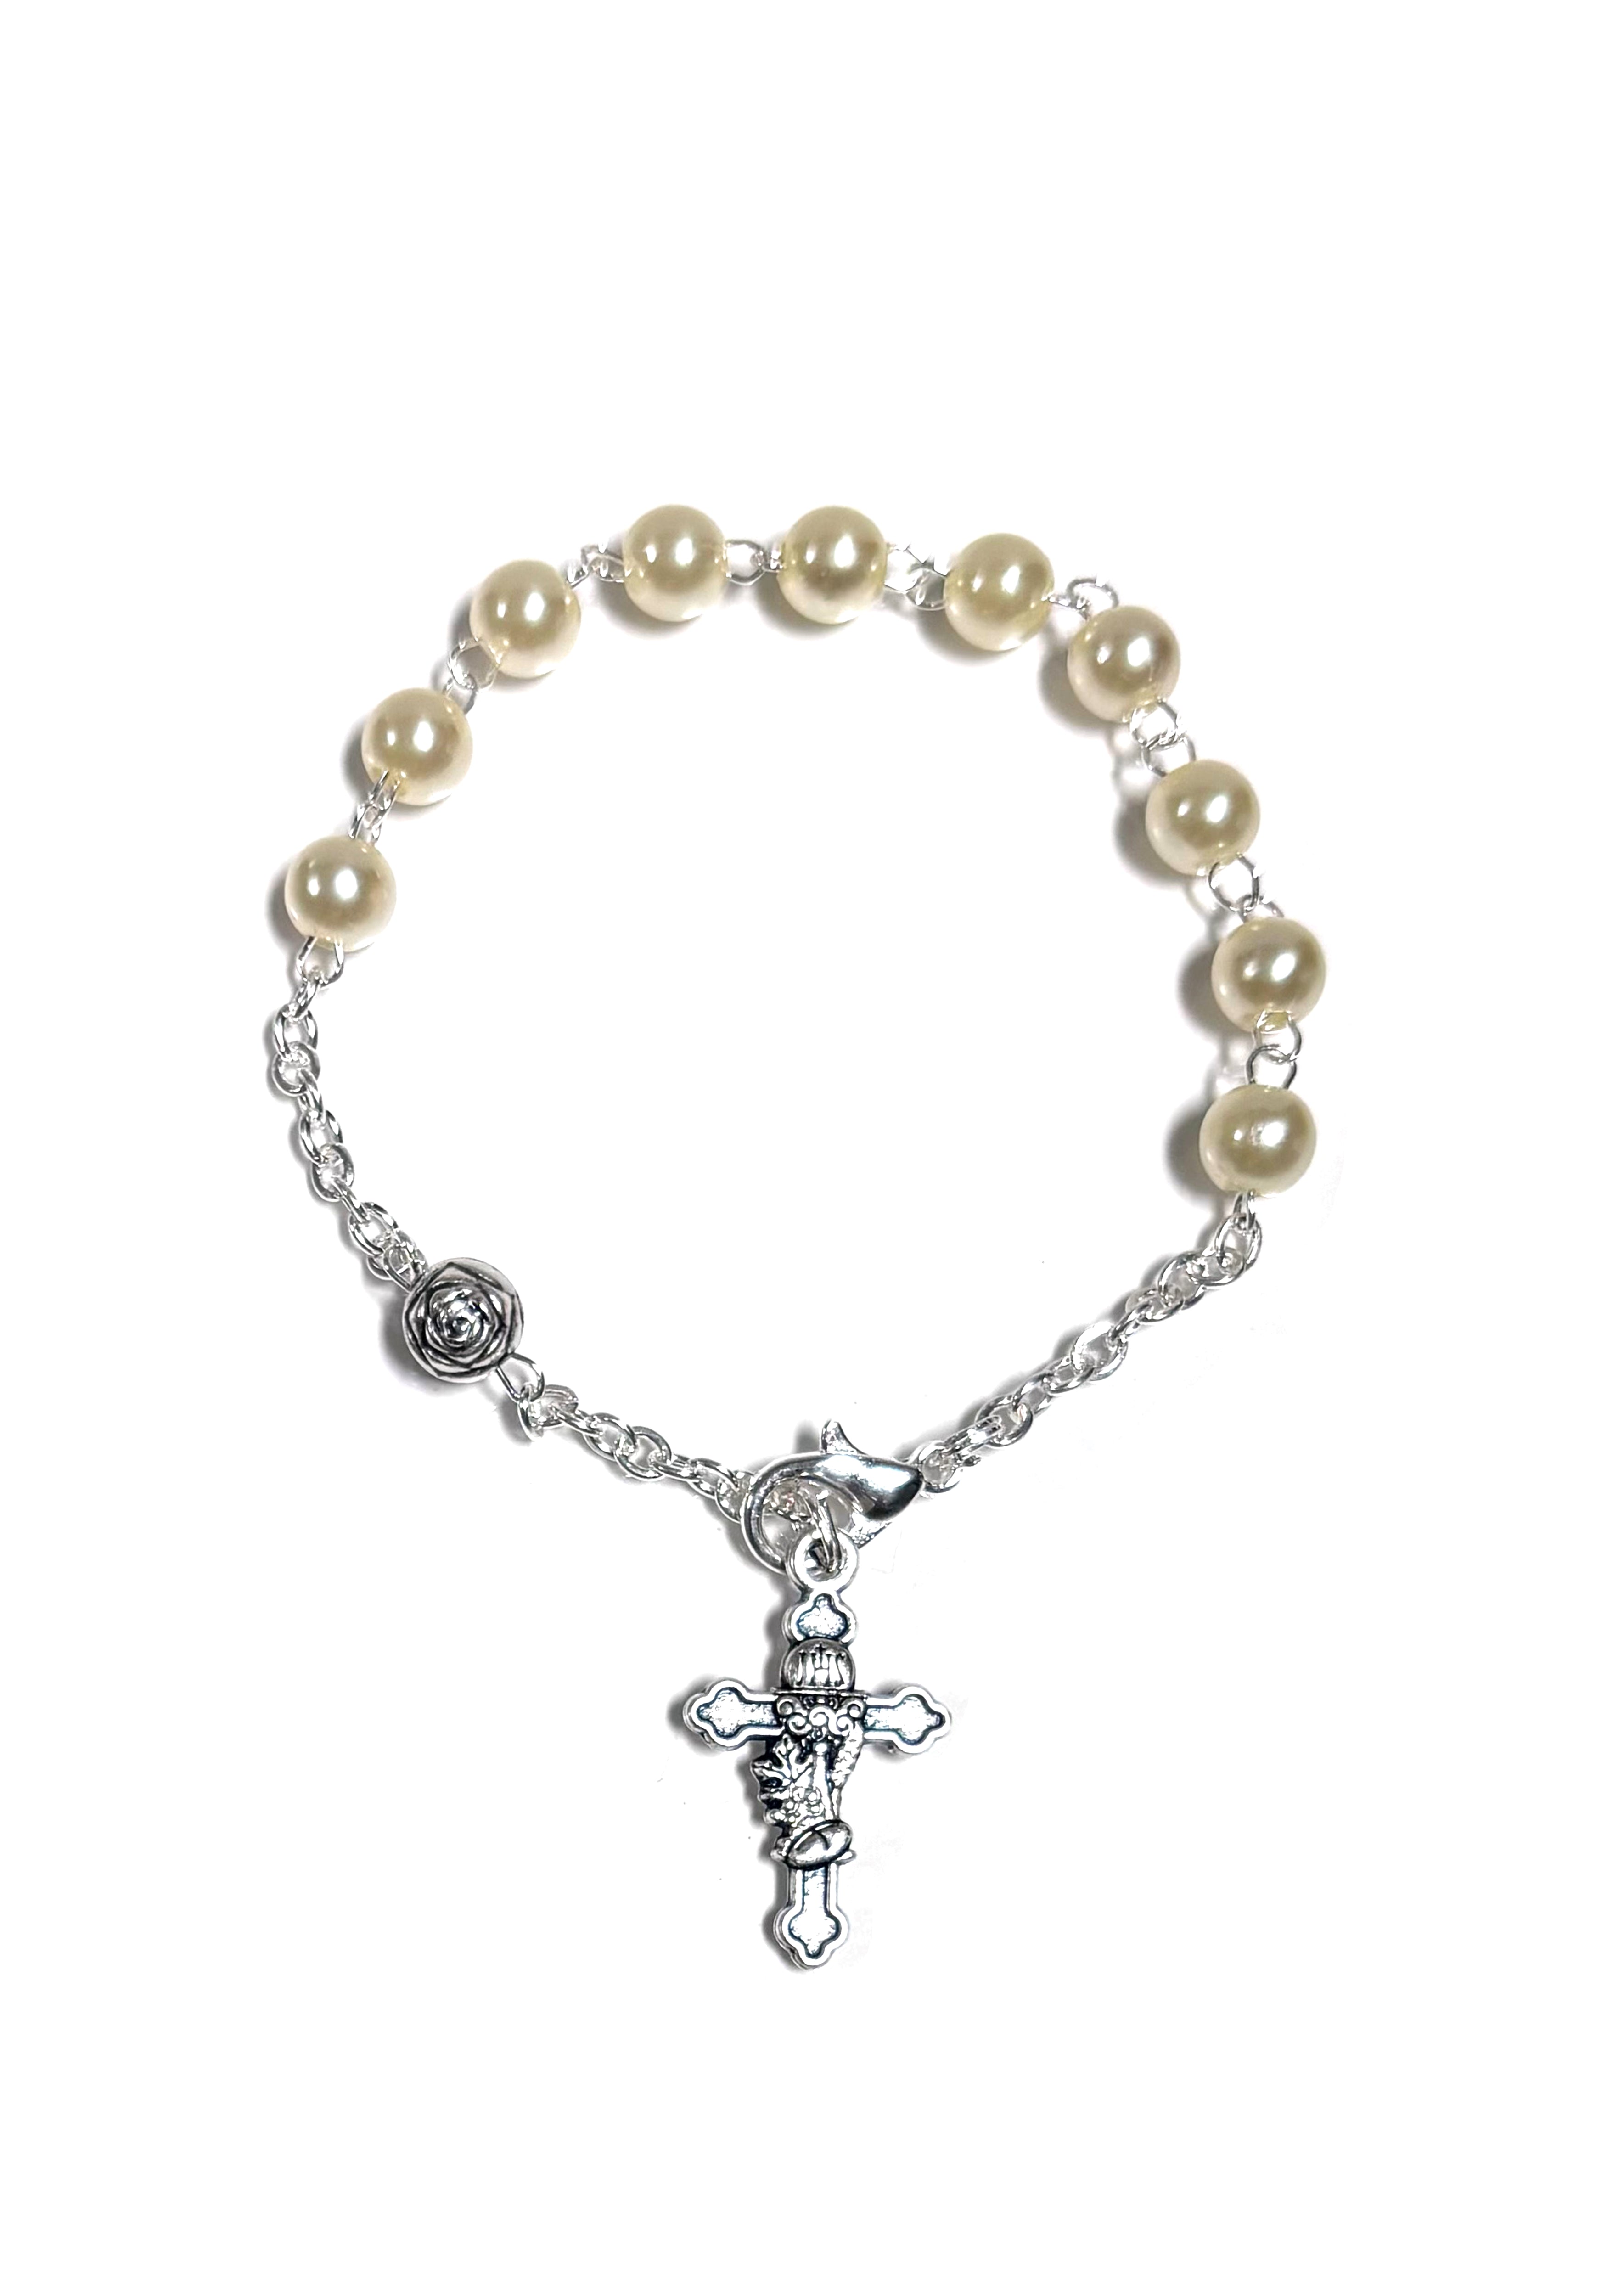 Silver and pearl bead bracelet with communion cross